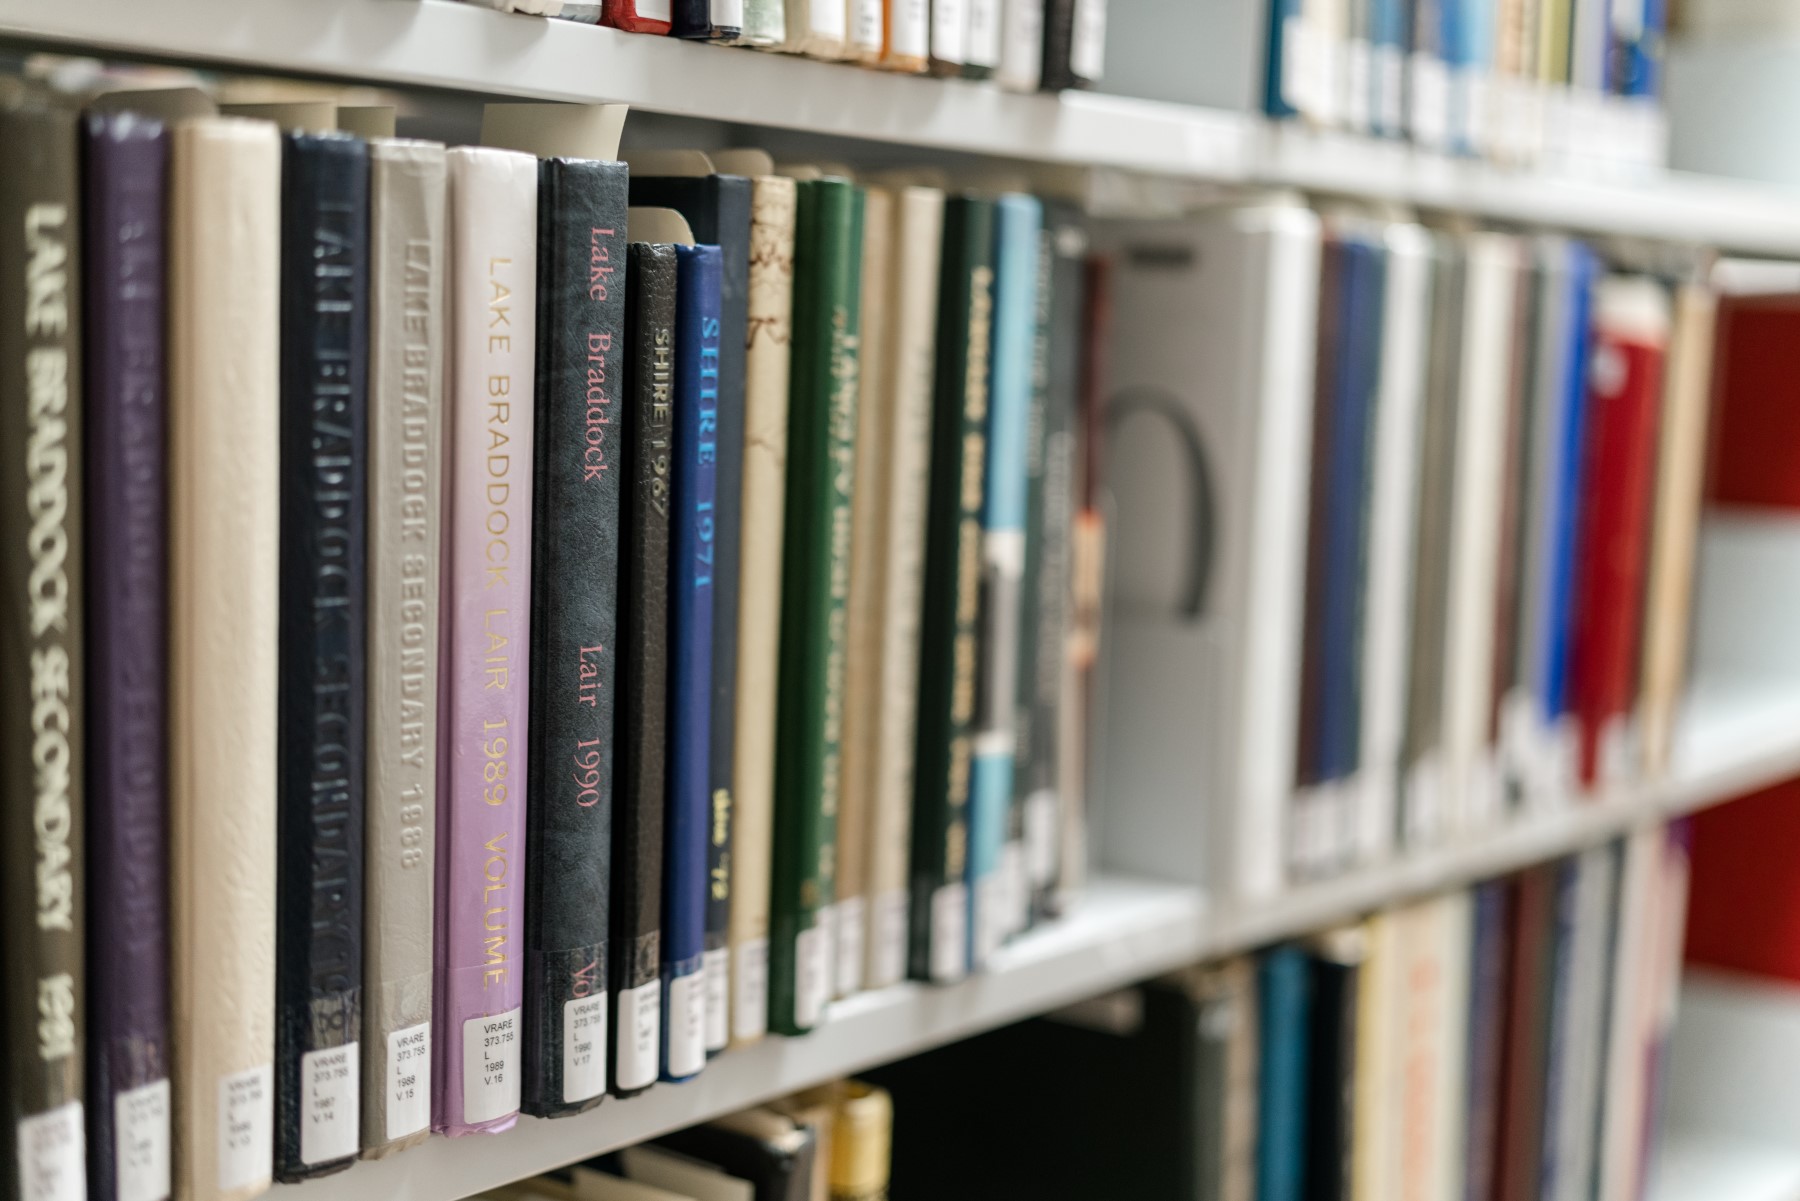 a shelf in the Virginia Room library holding rows of local yearbooks